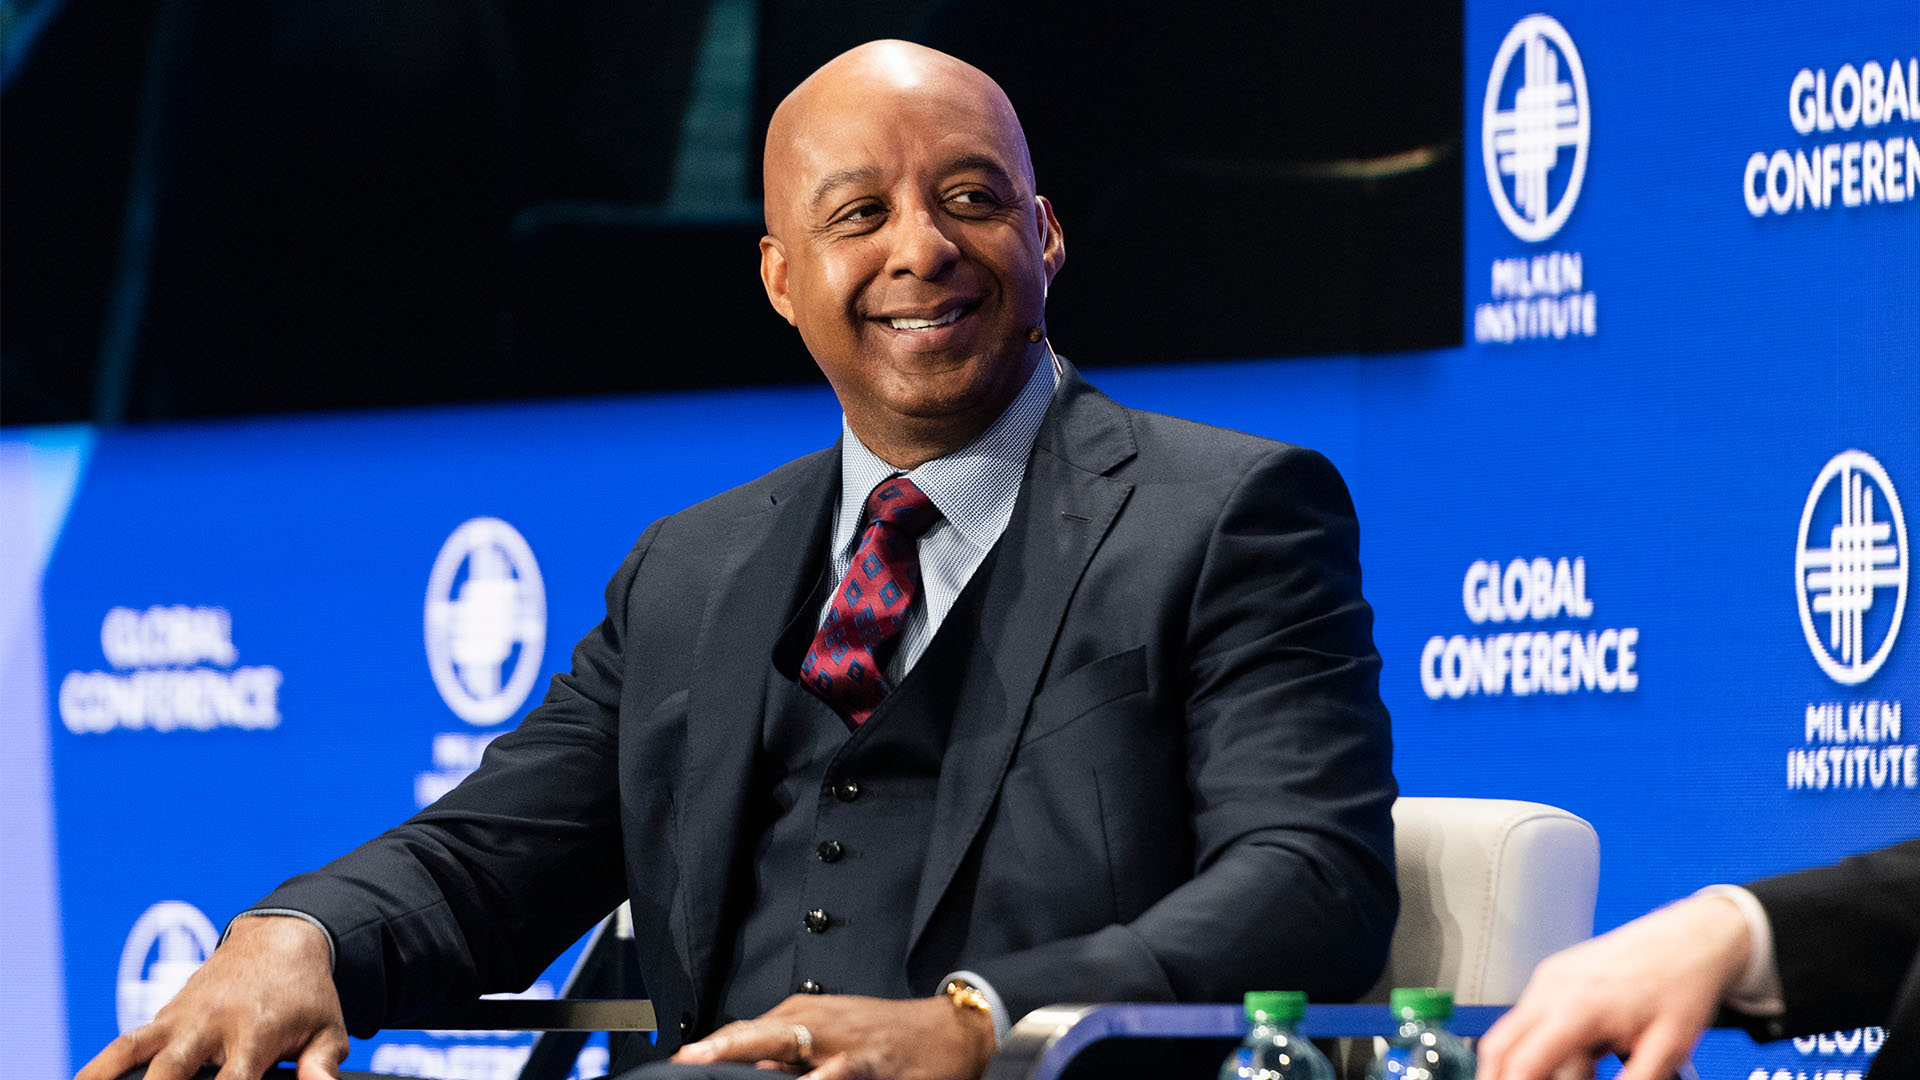 How Marvin Ellison, One Of The World's Wealthiest Black CEOs, Saw His Stock Market Value Increase By $3.4M In Less Than A Month